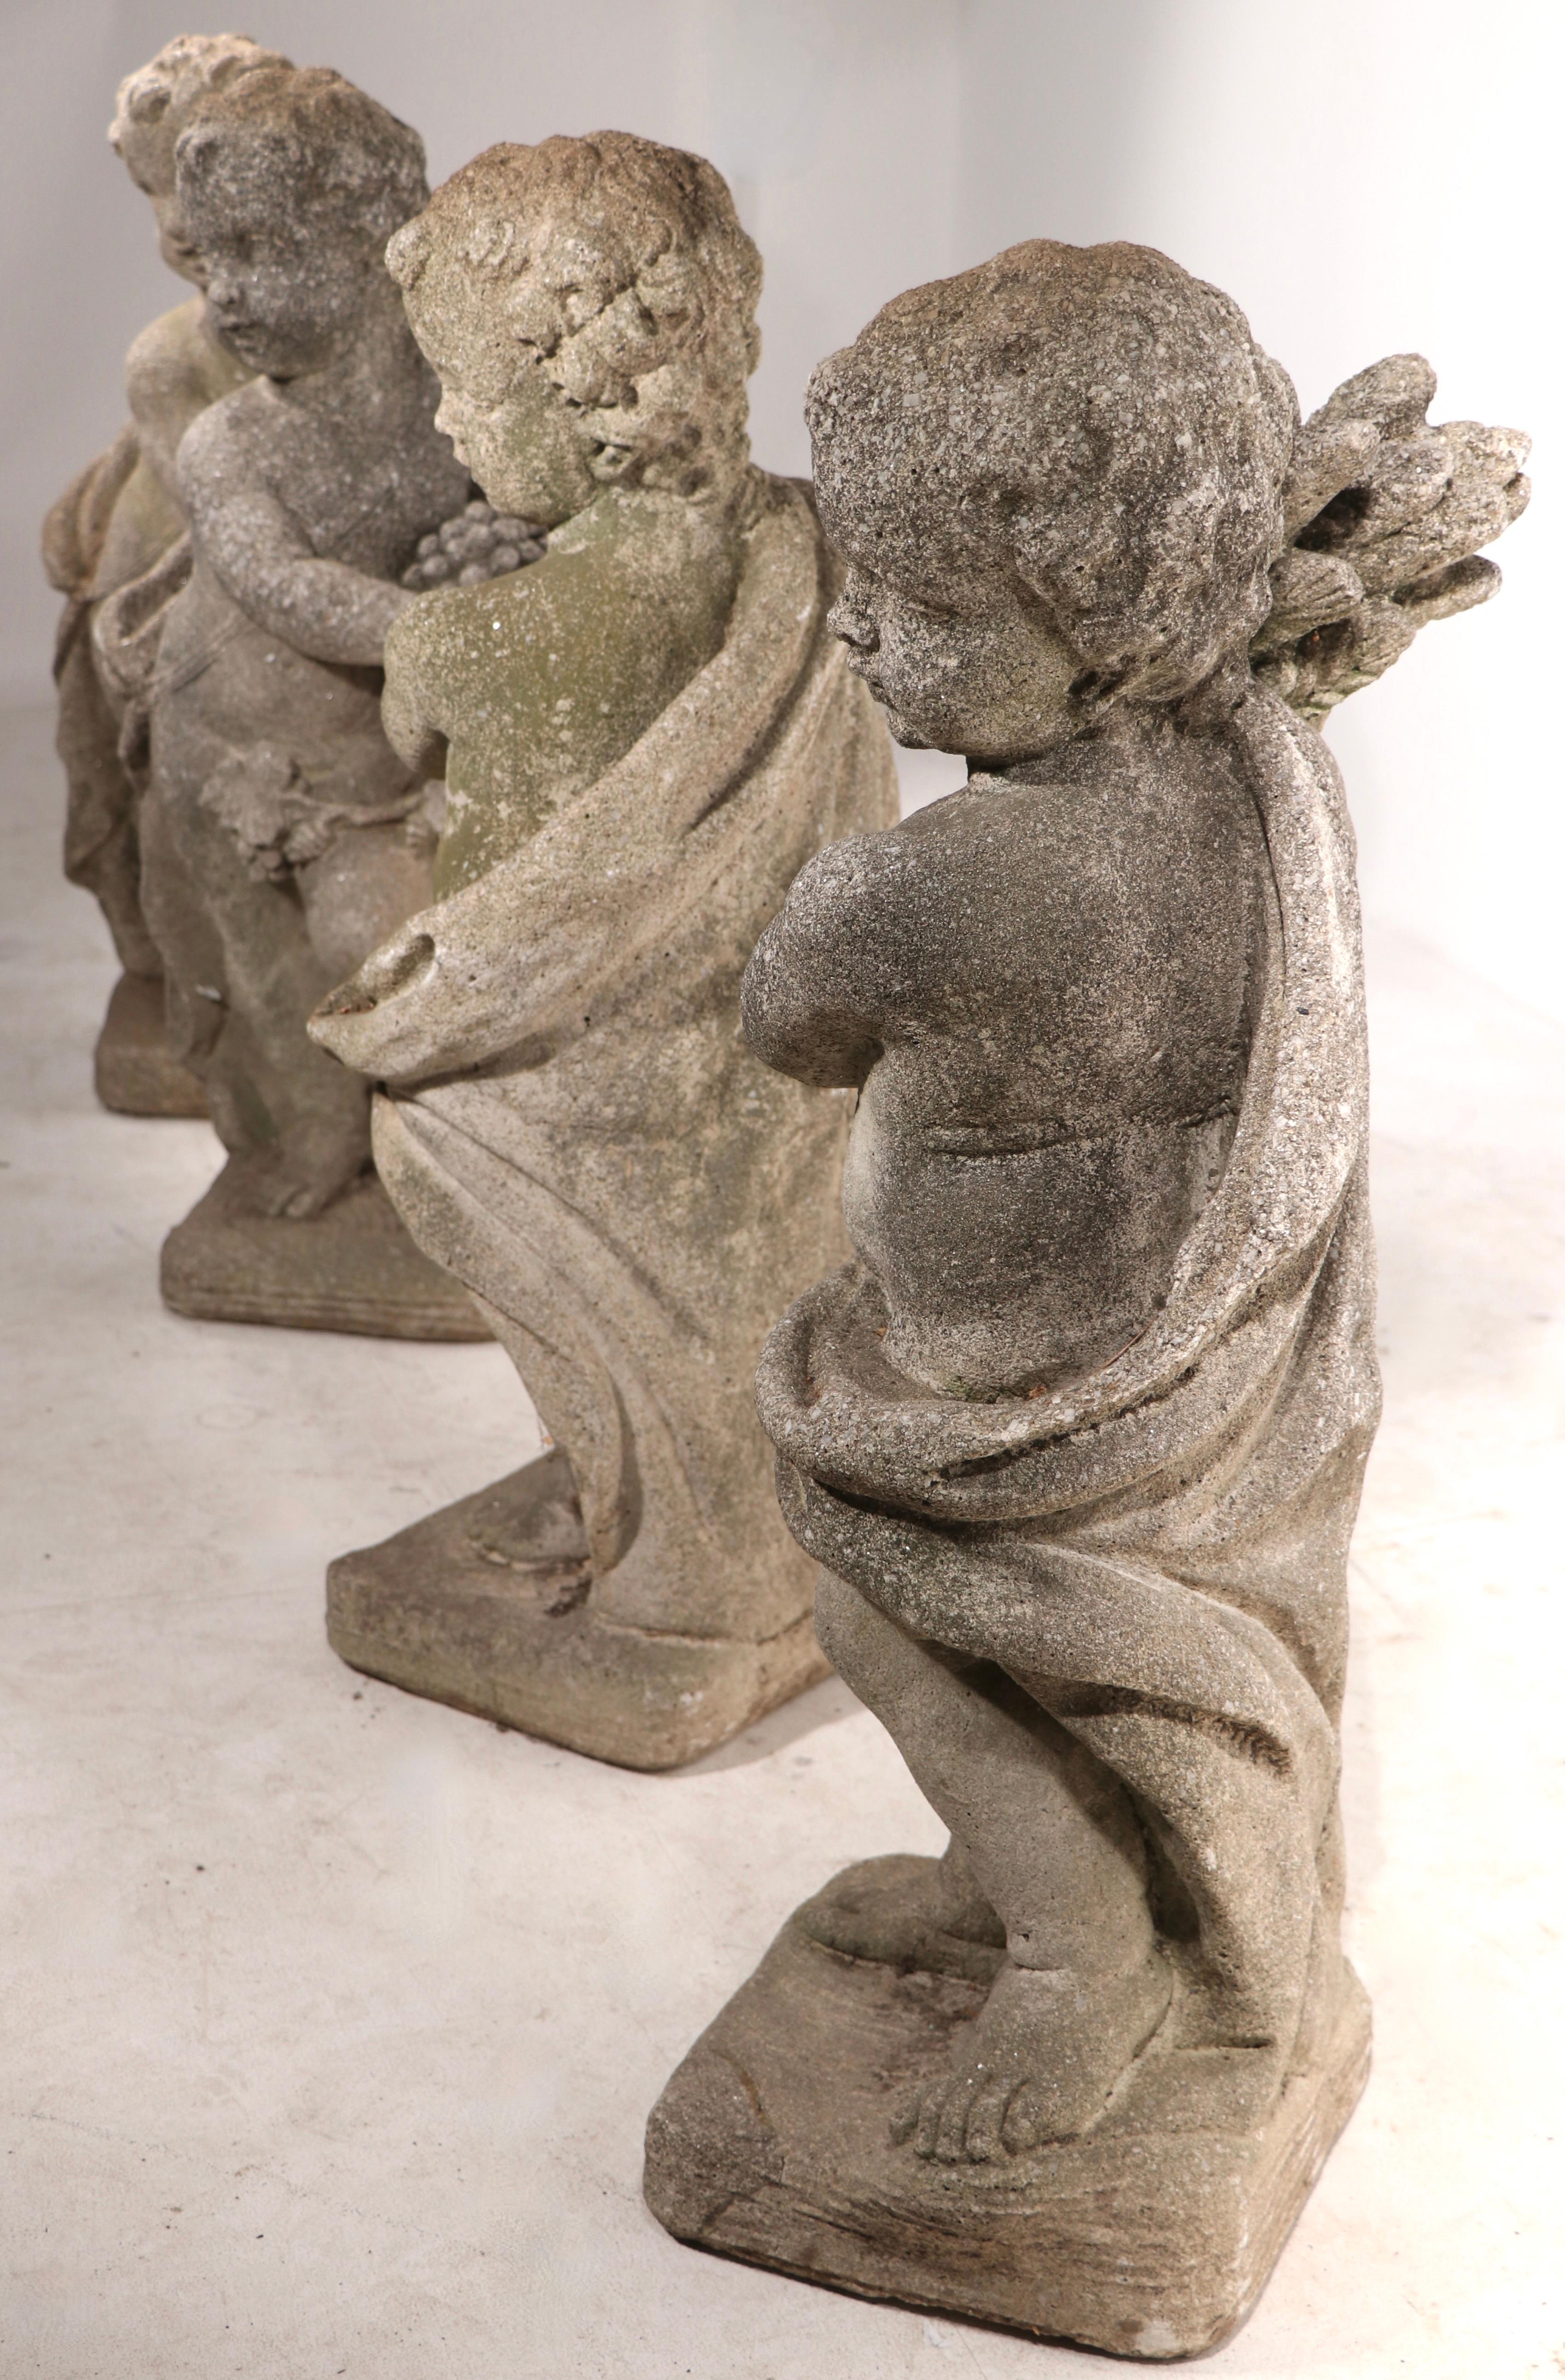 Second payment for Four Seasons Cast Stone Garden Statues 9